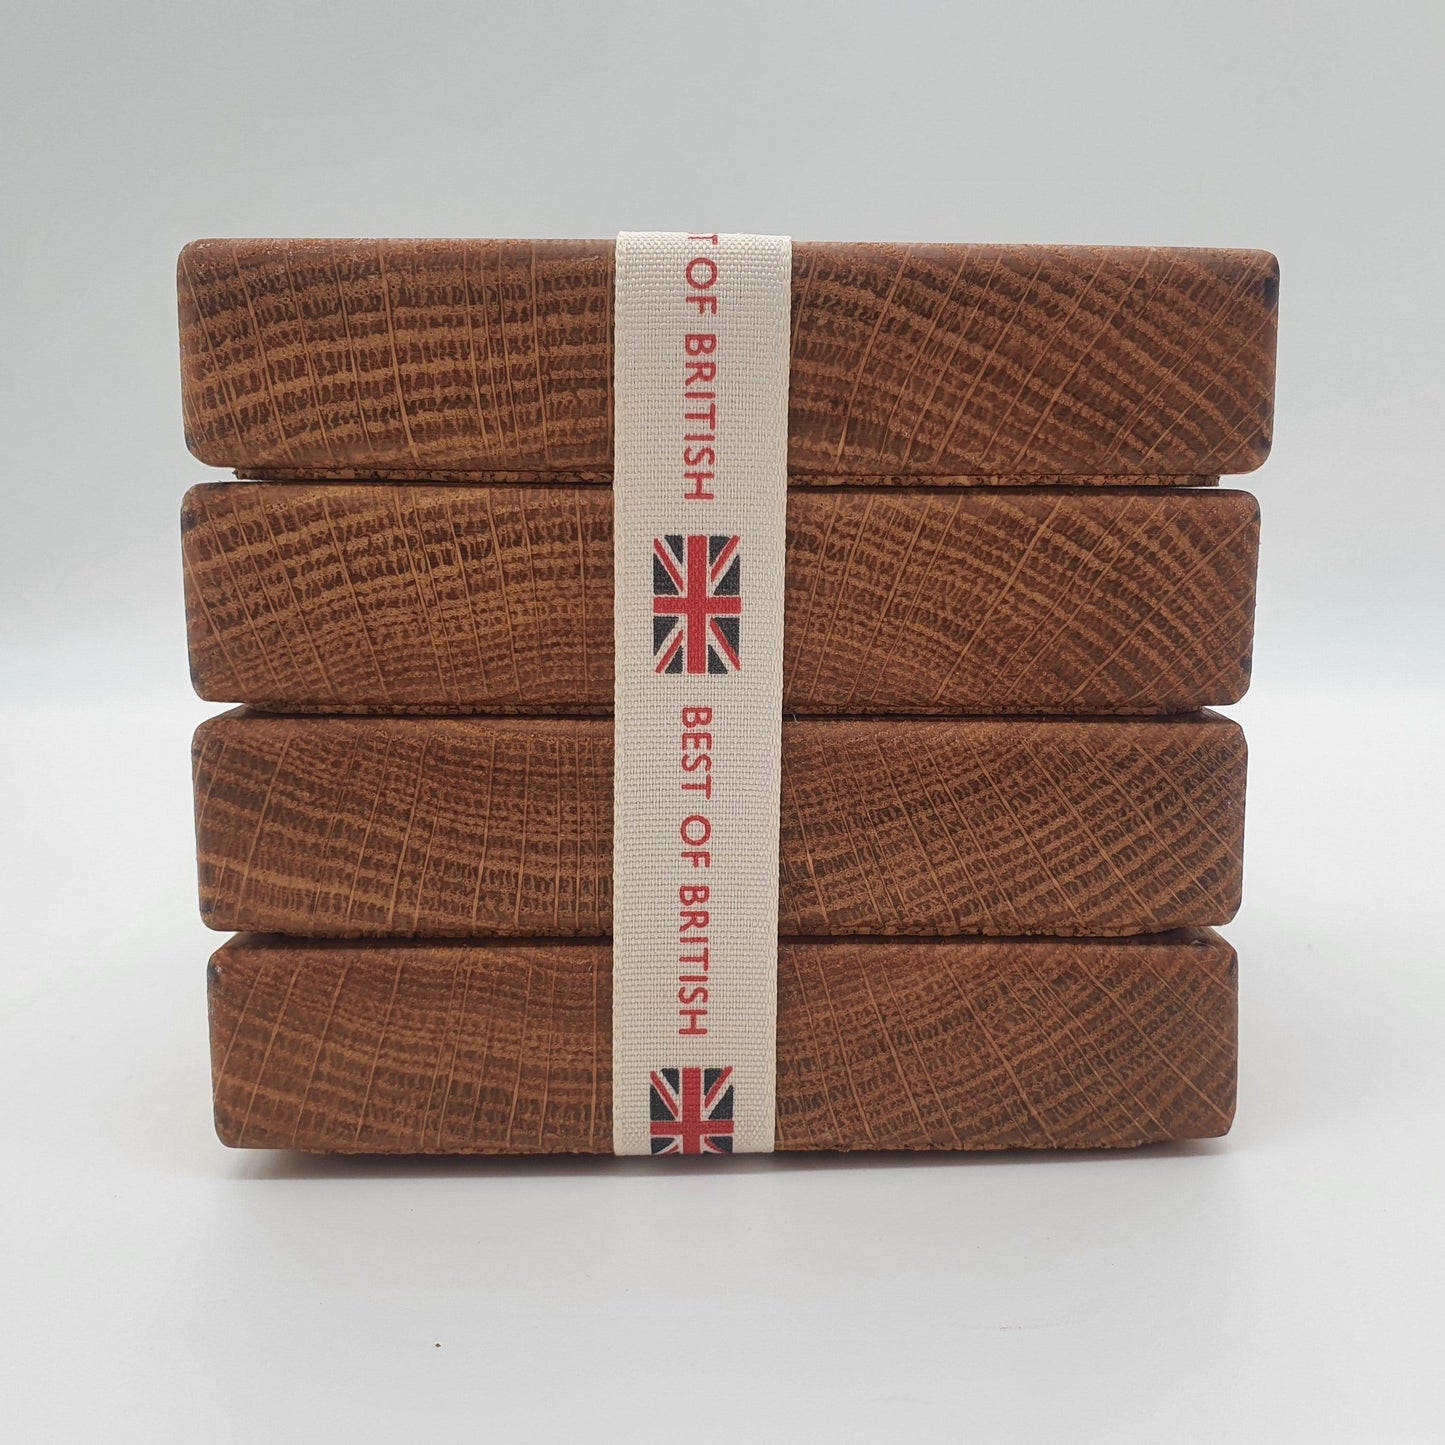 Square solid oak chunky coasters - The Brit Workshop